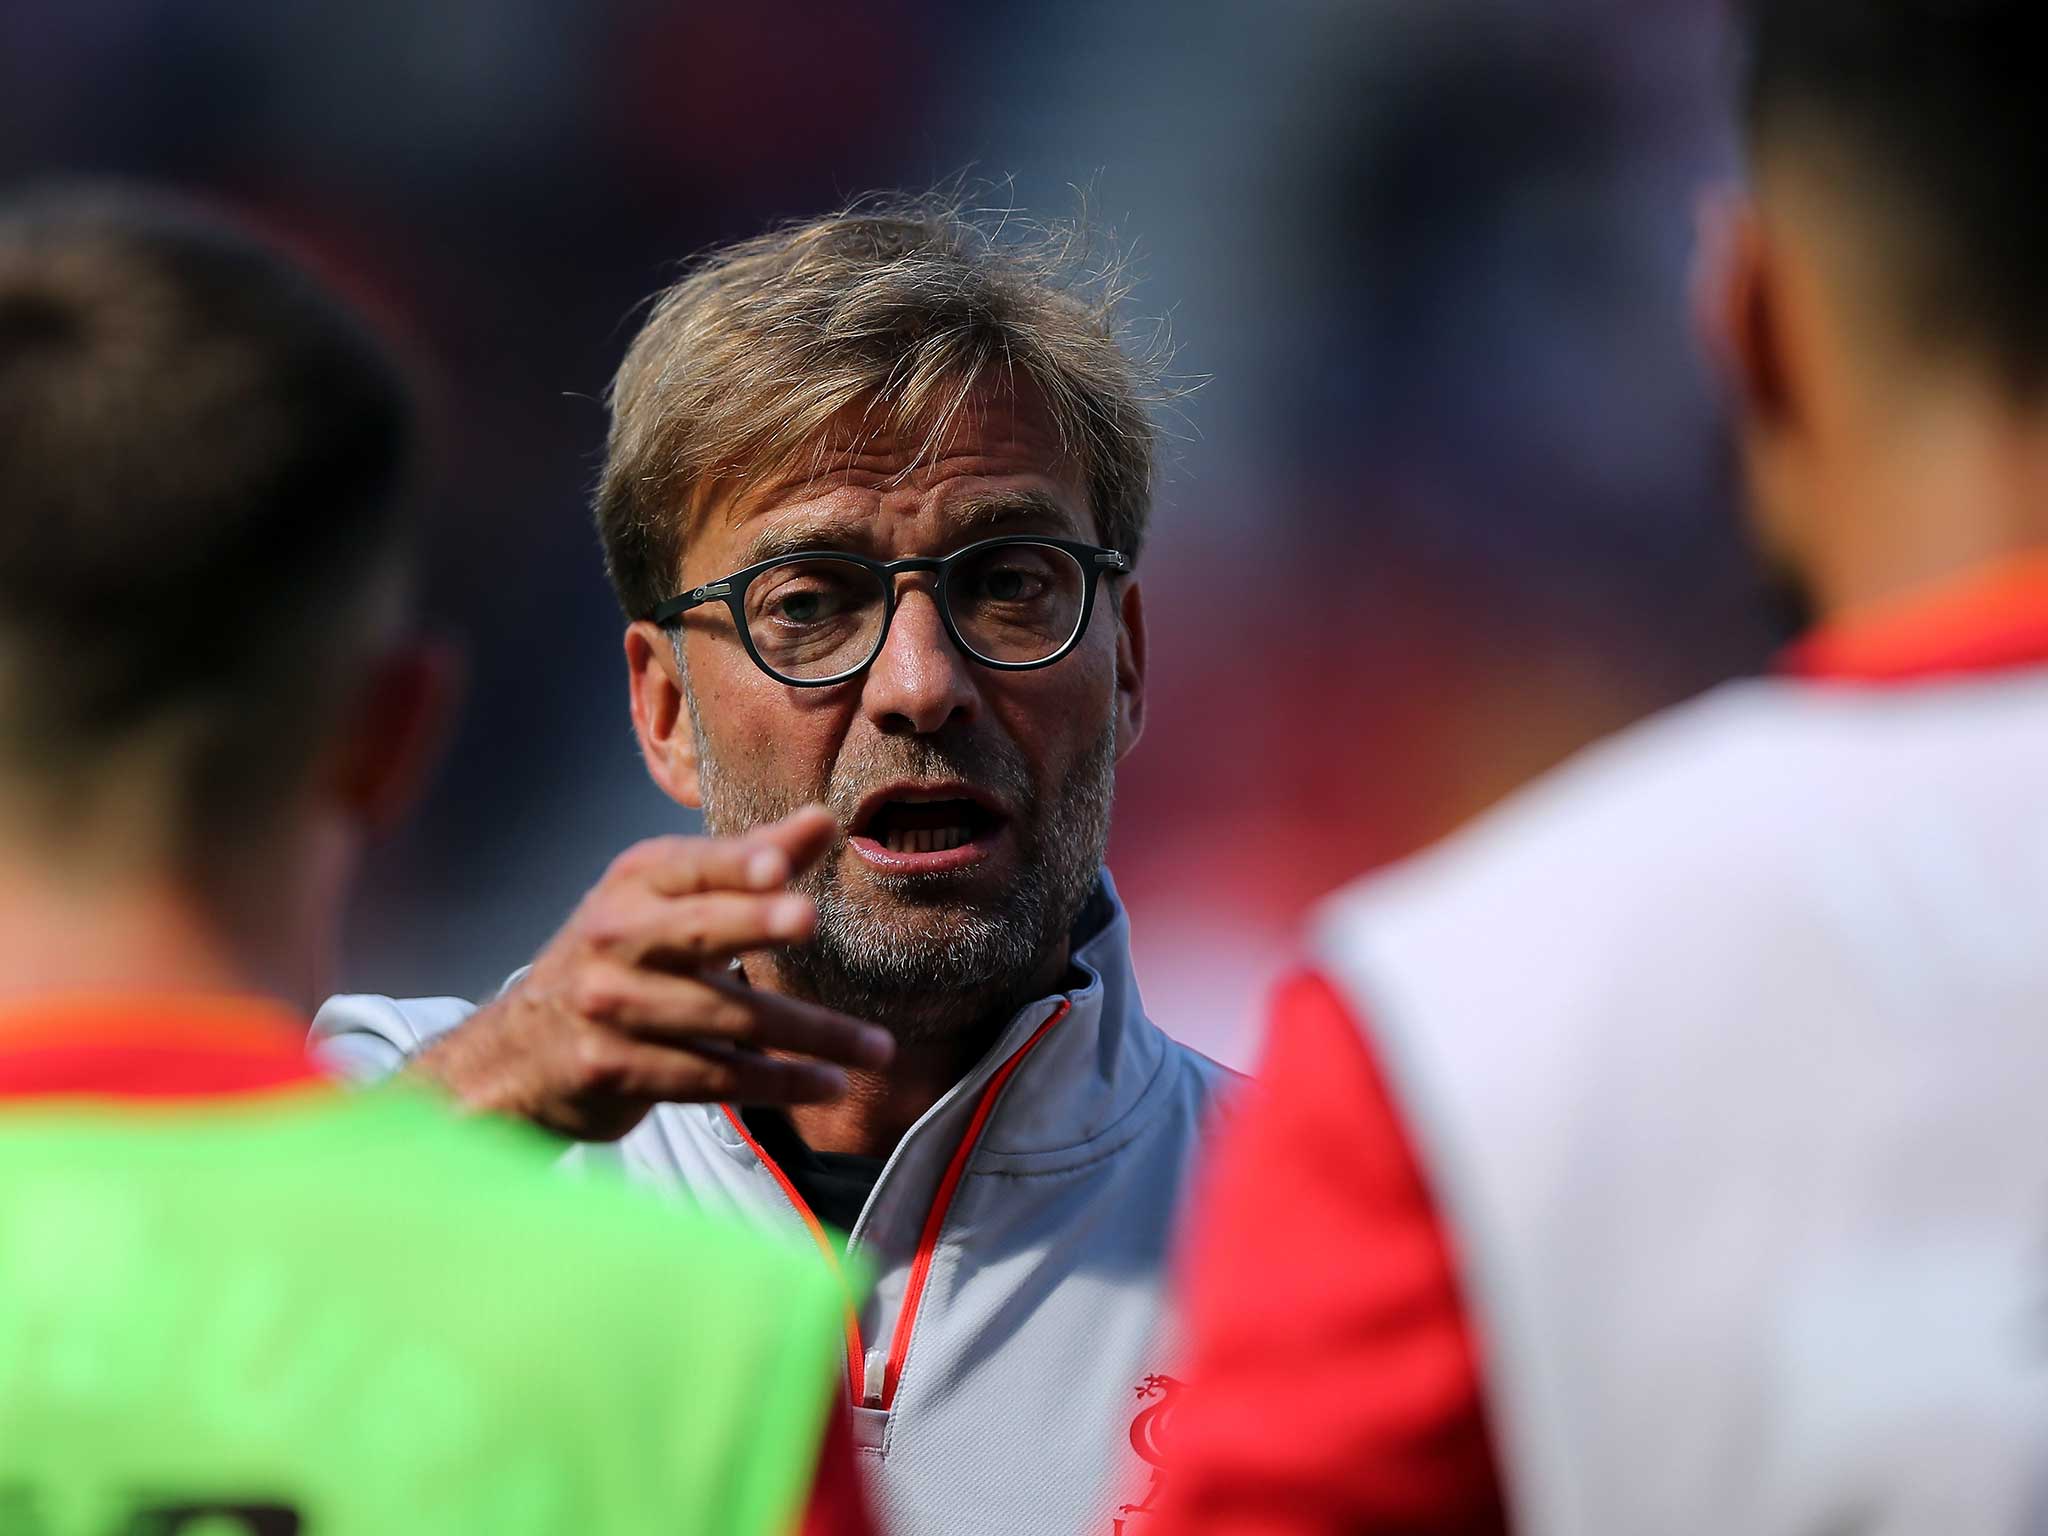 Jurgen Klopp gives his players instructions during Liverpool's victory against Wigan